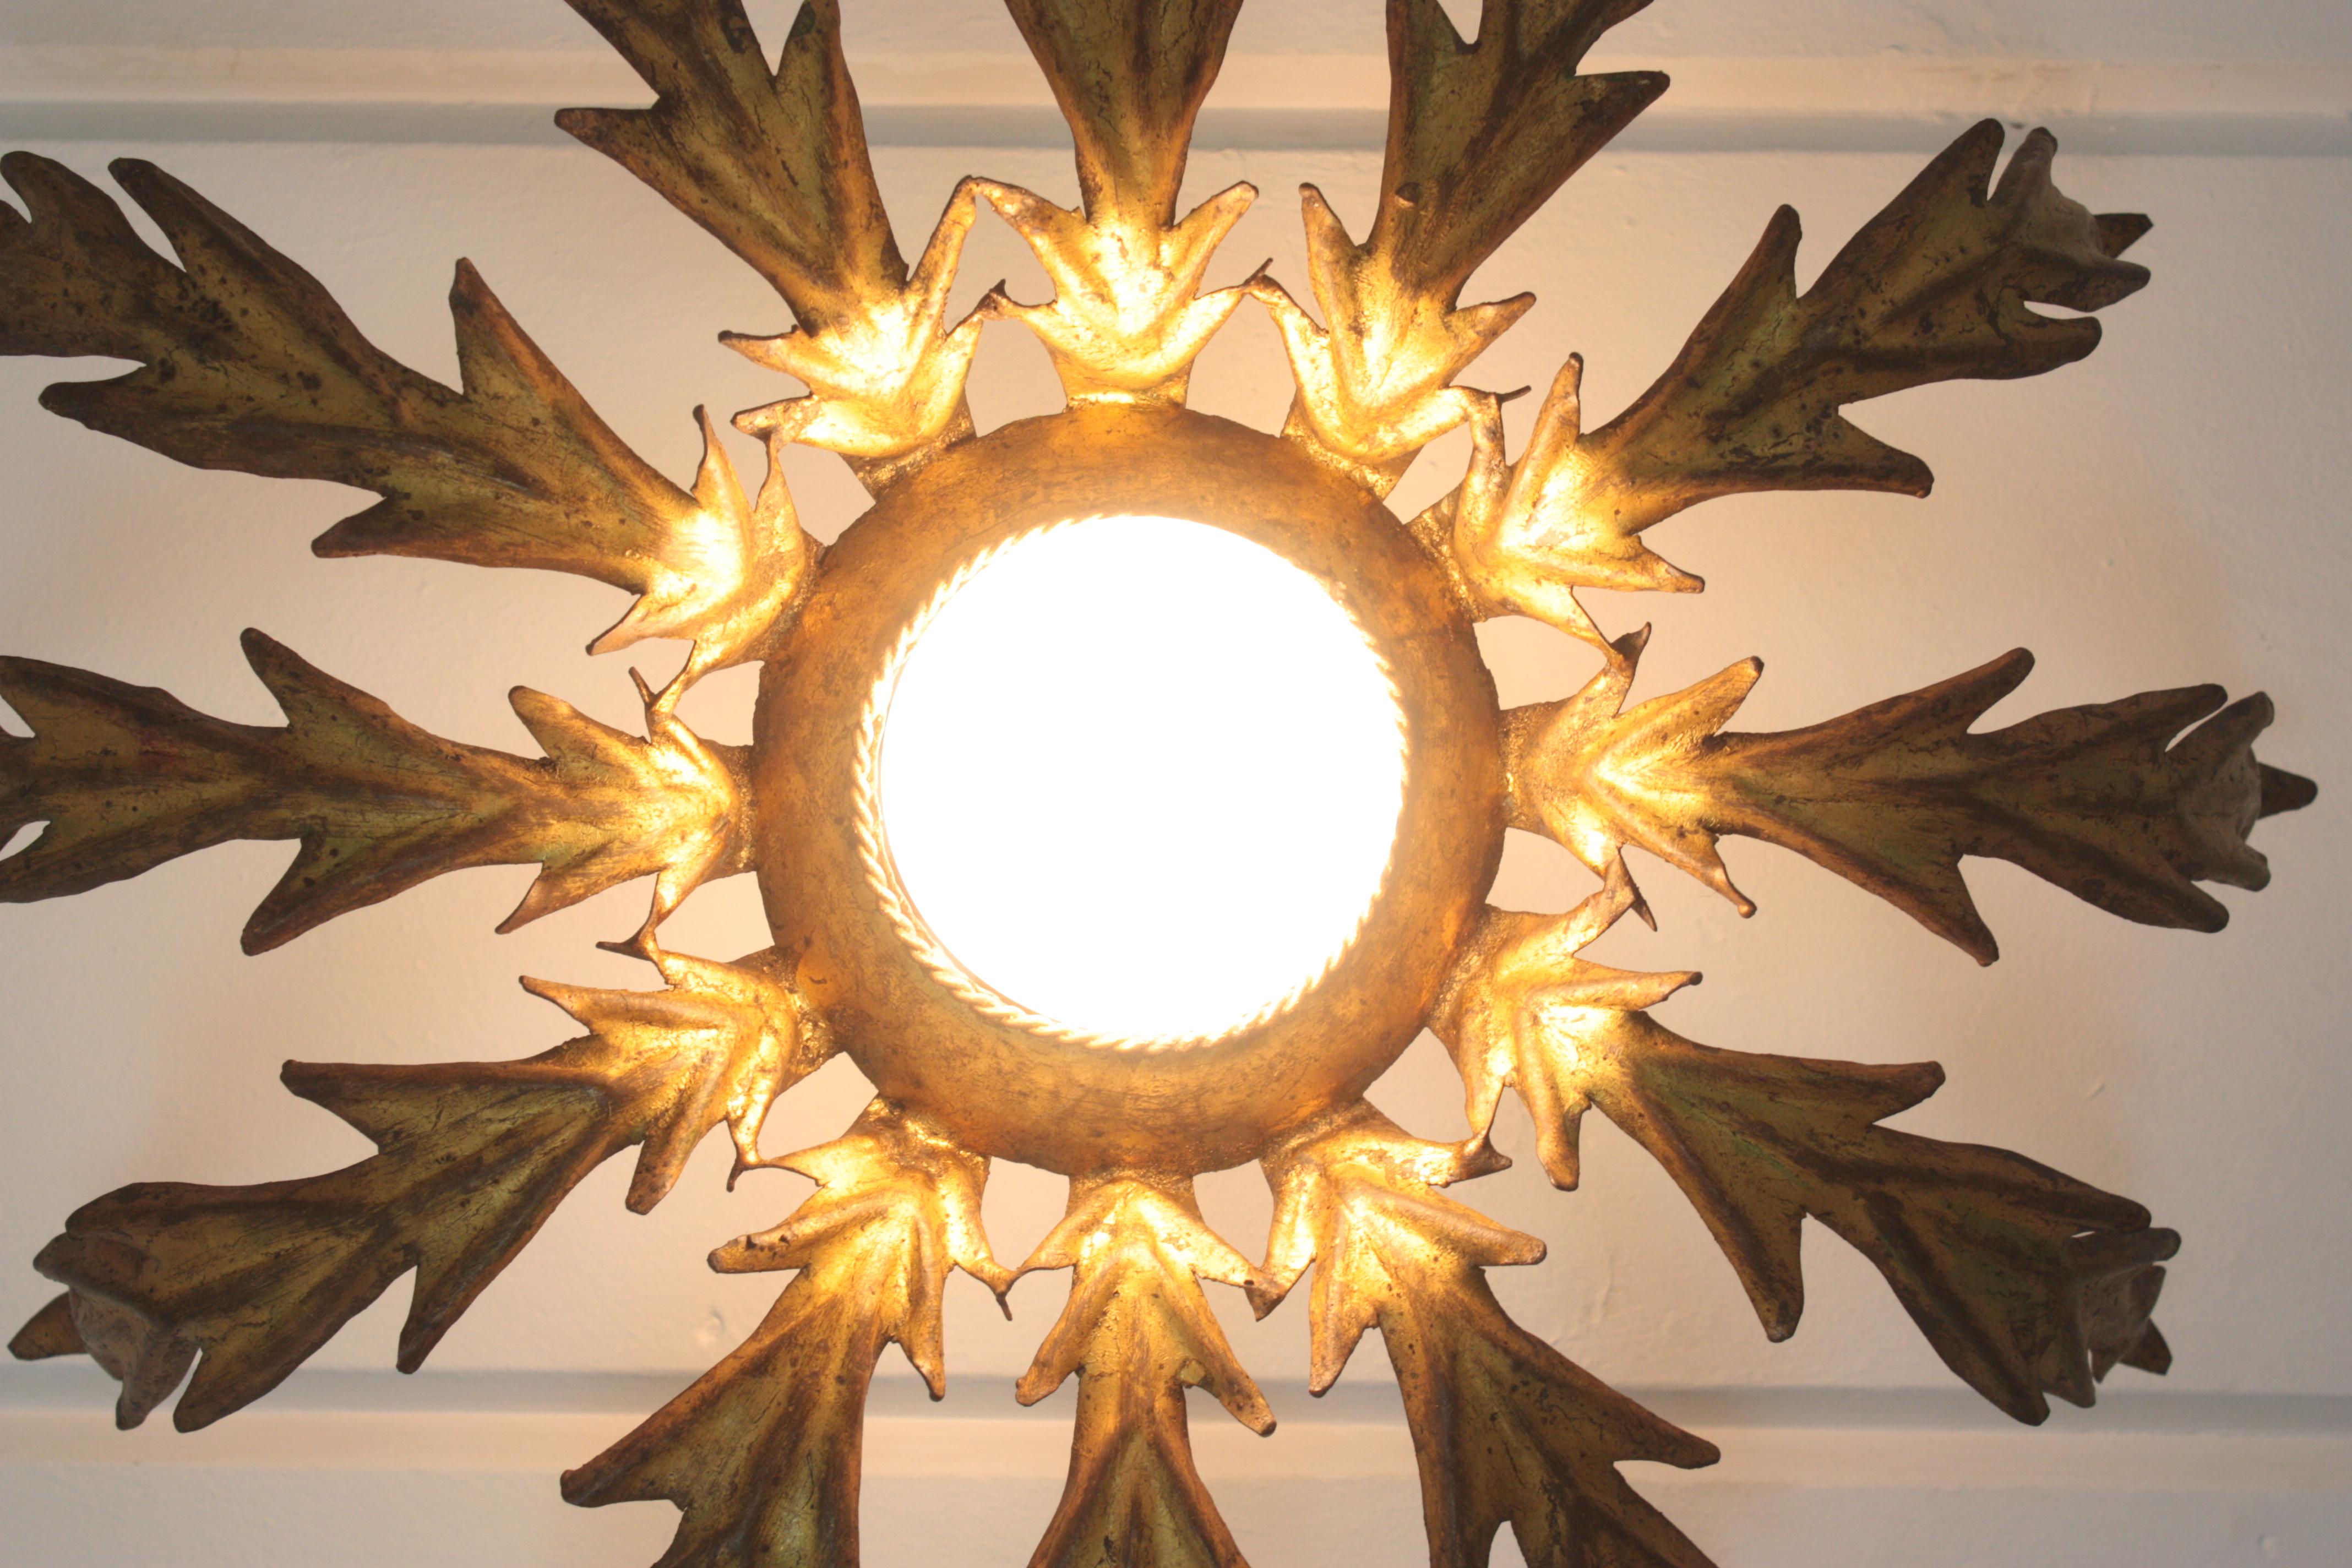 French Sunburst Leafed Ceiling Light Fixture in Gilt Iron, 1940s For Sale 3